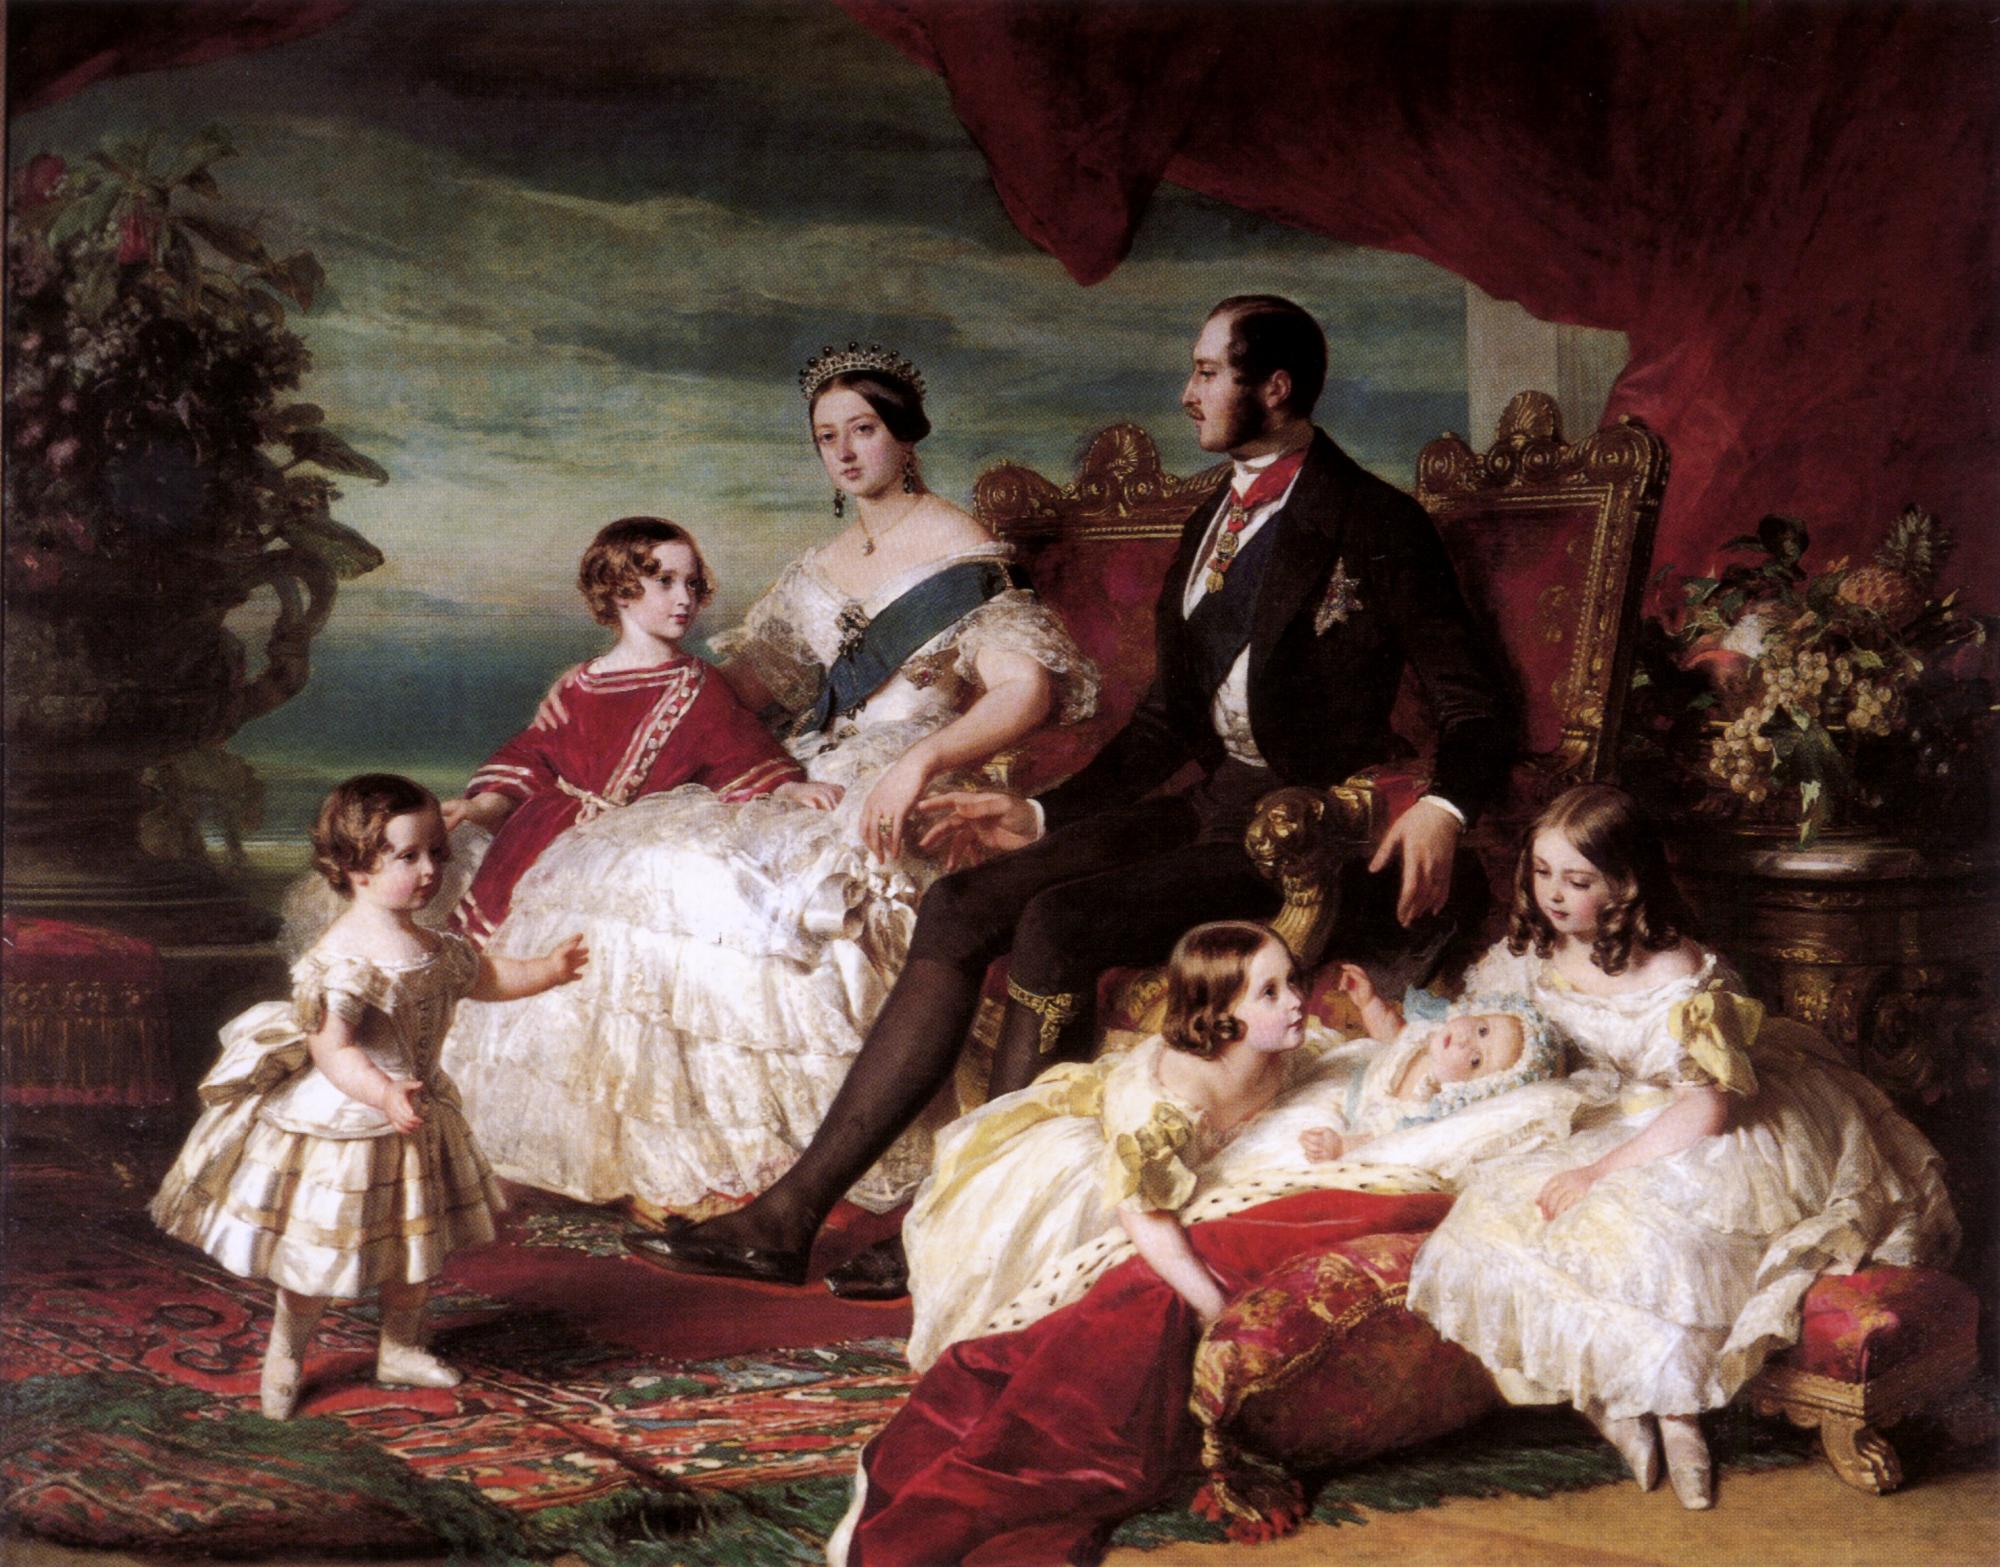 Queen Victoria and Prince Albert with their children